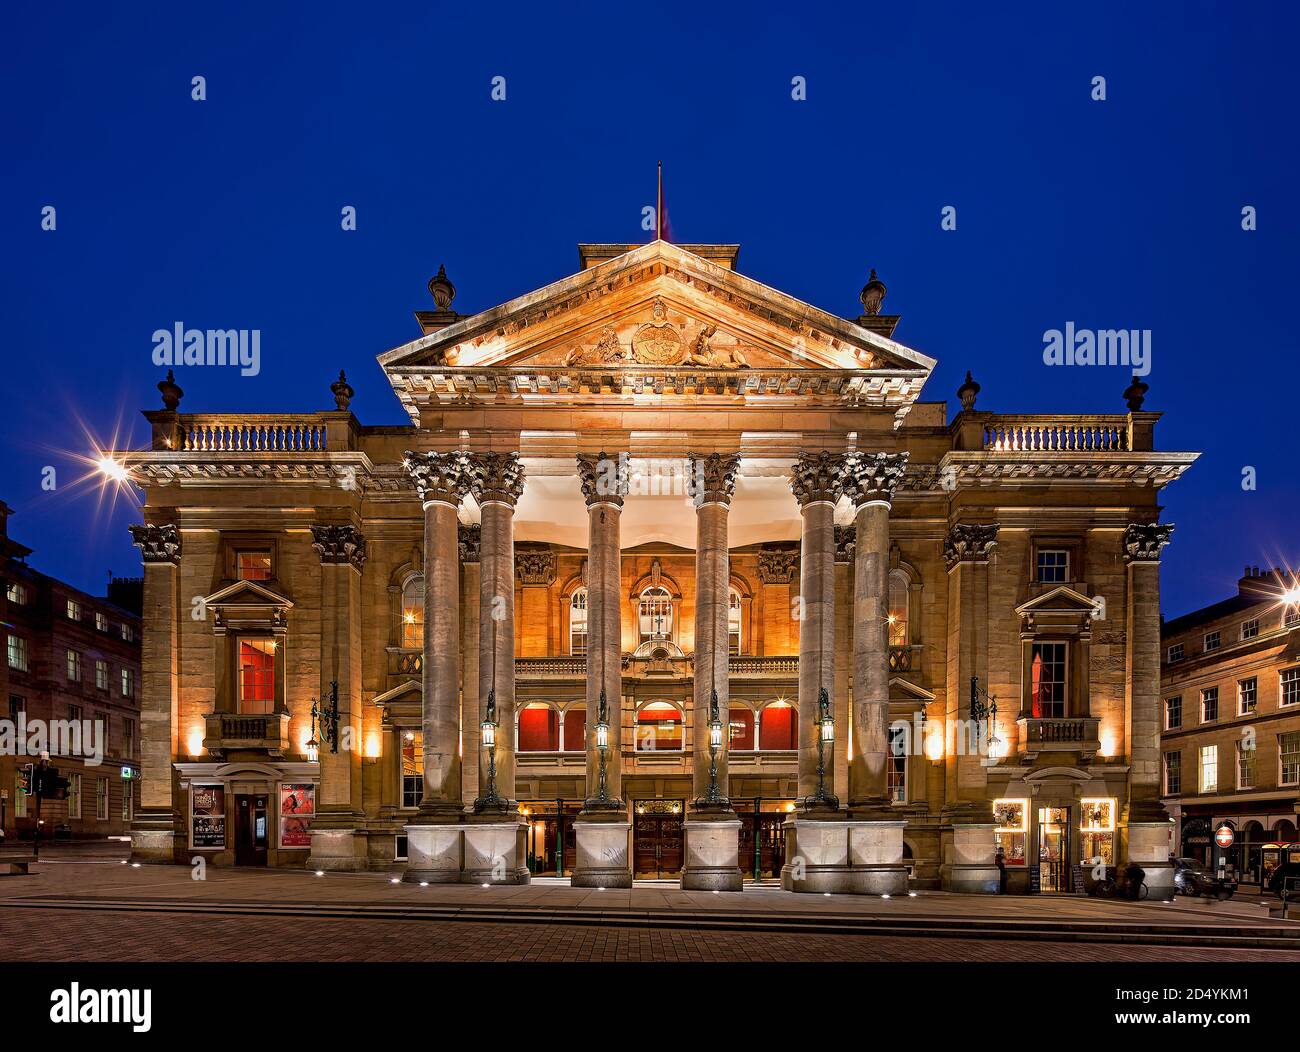 external view at dusk of Newcastle theatre royal, Newcastle upon Tyne, England, United Kingdom Stock Photo